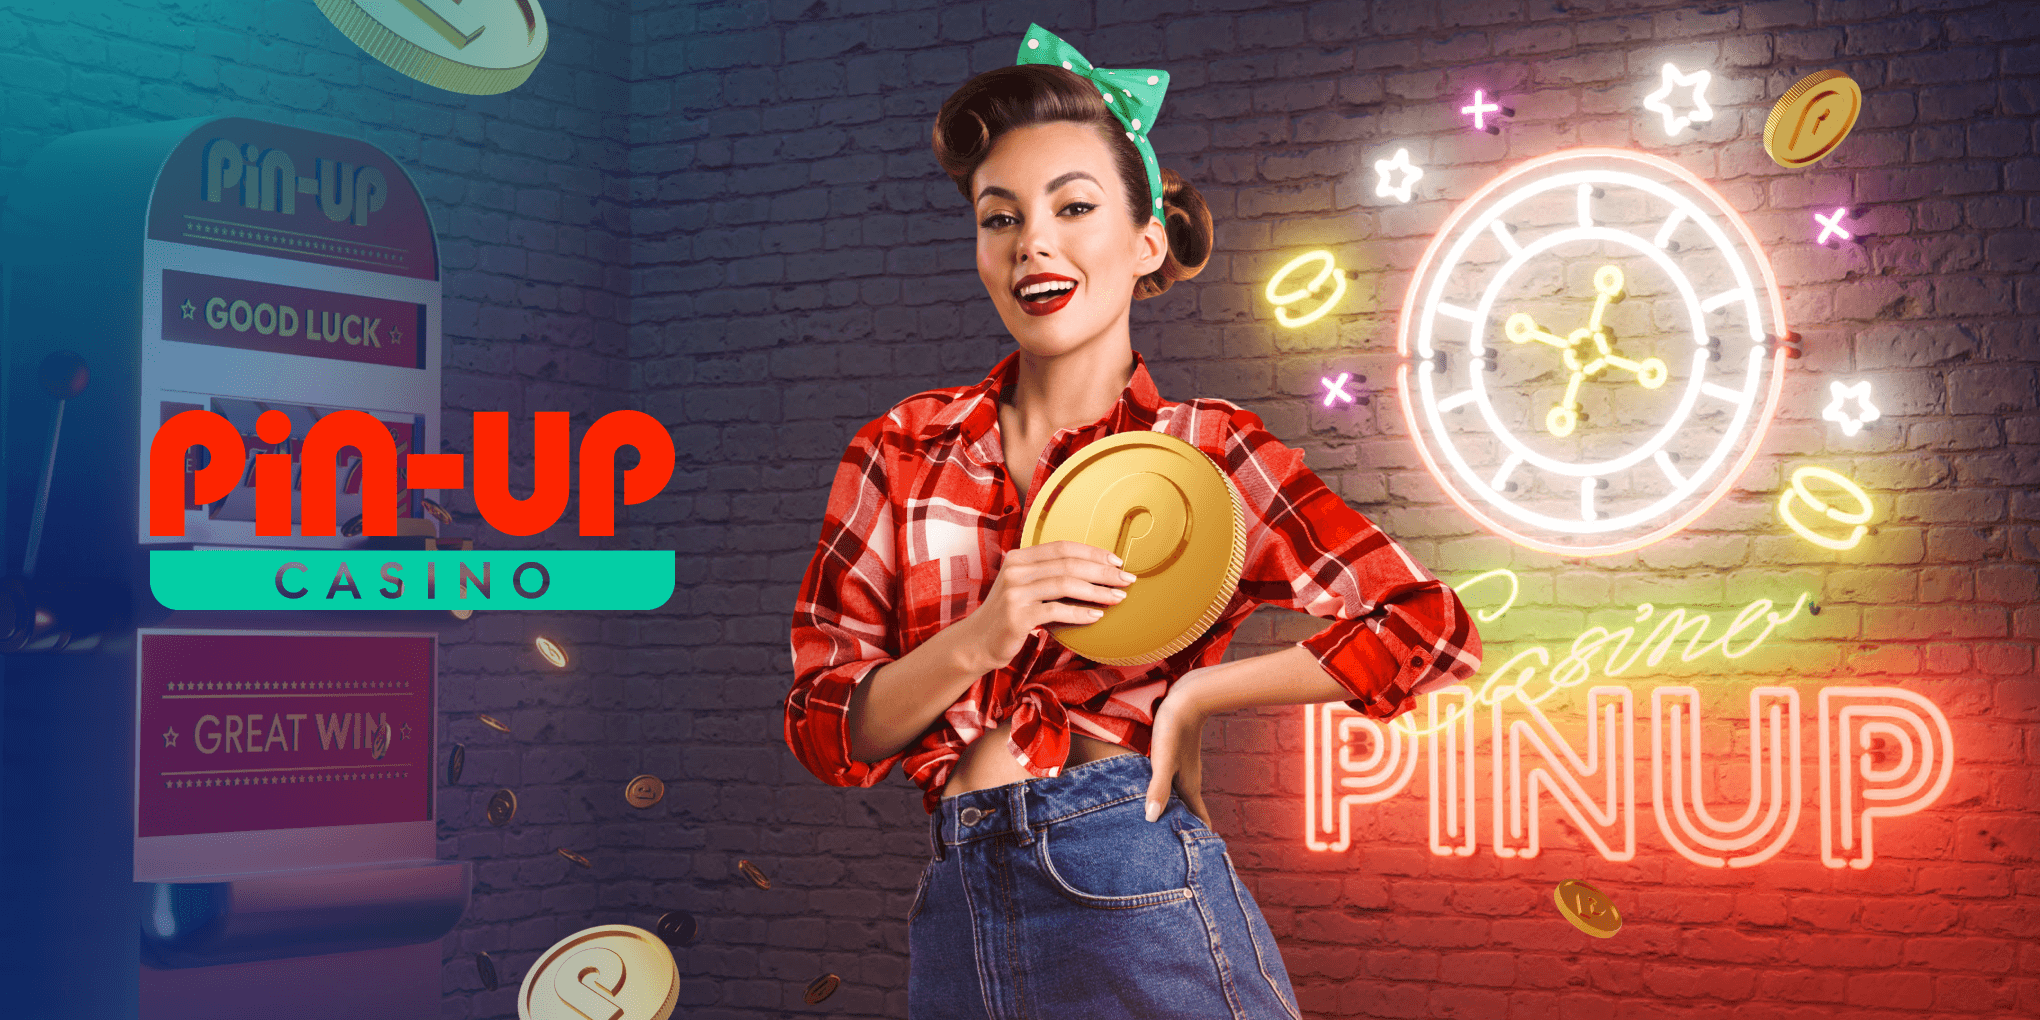 Why pin up online Succeeds